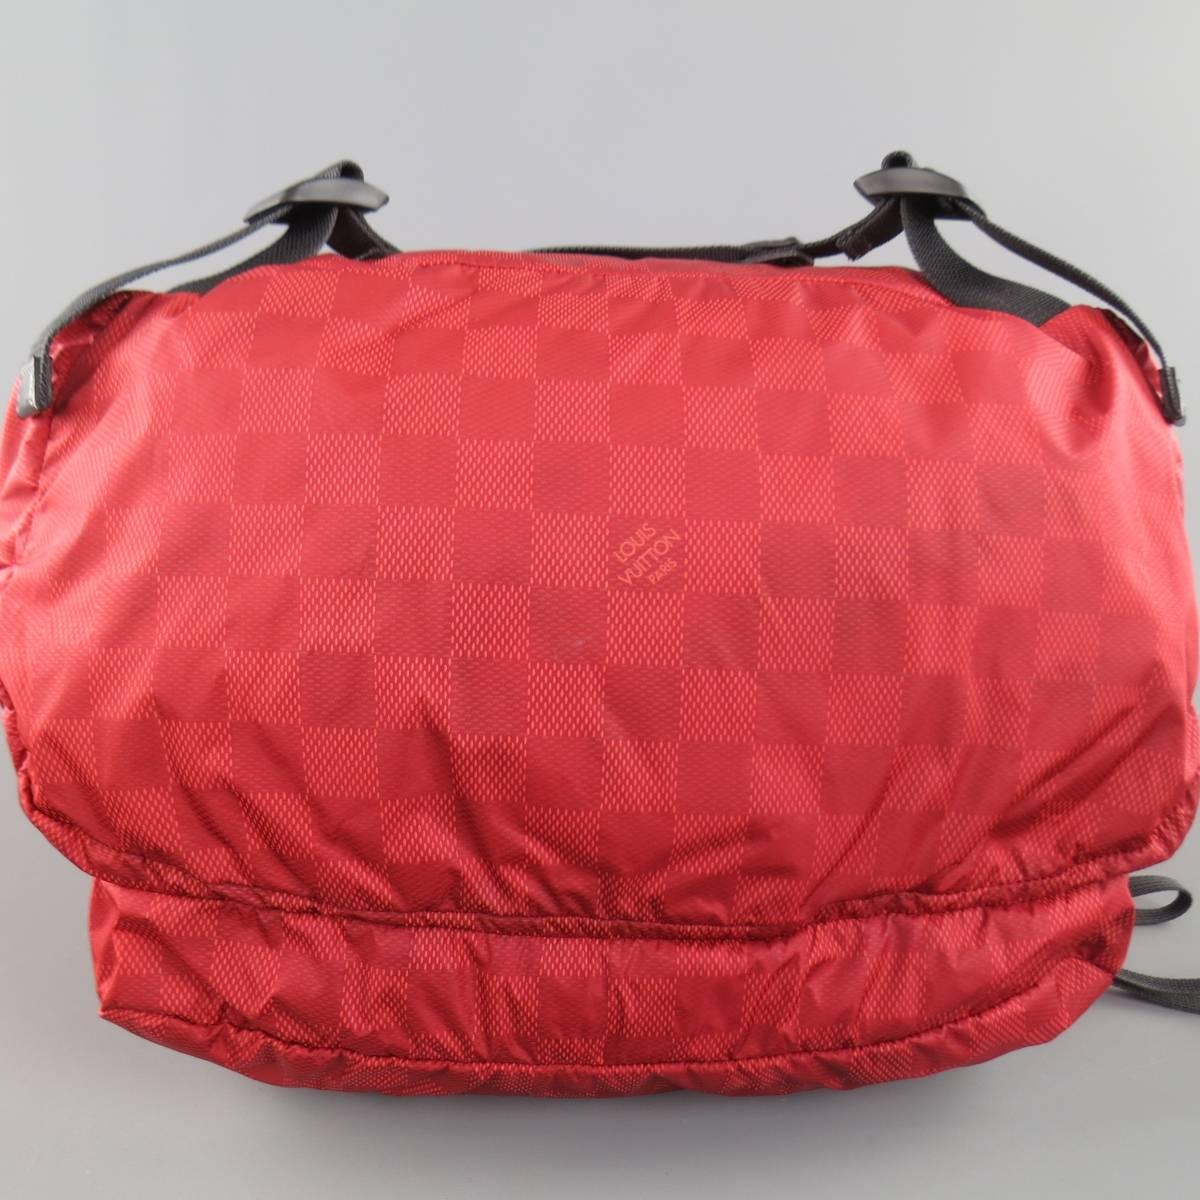 LOUIS VUITTON Cup 2012 Brick Red Damier Print Nylon Backpack 1